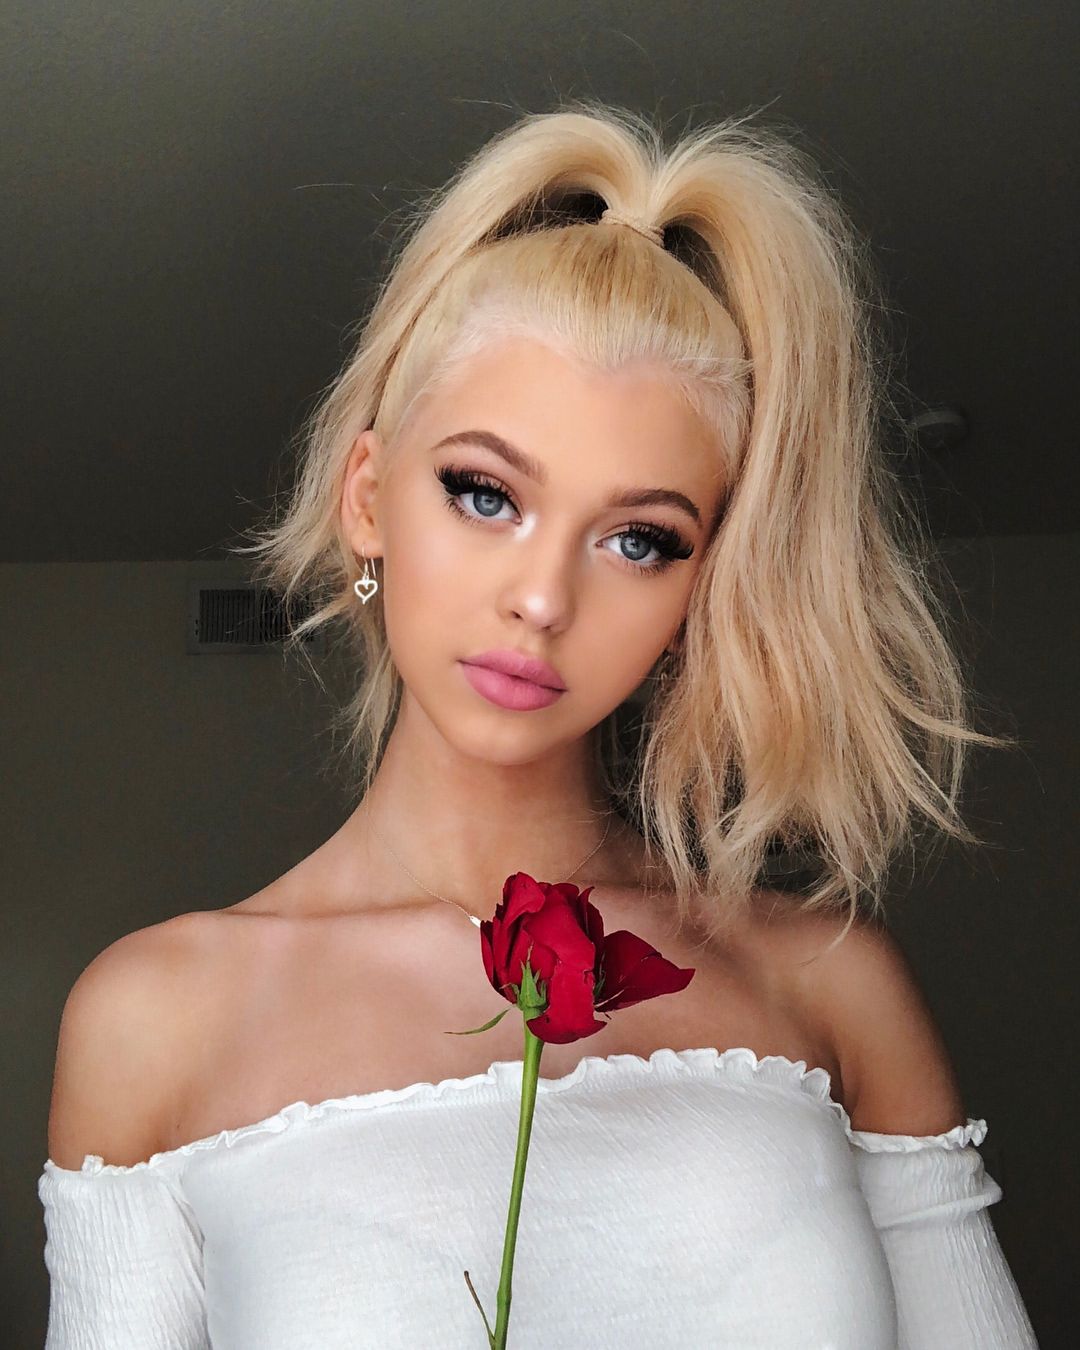 Loren Gray Photos (Uploaded By Our Users) .